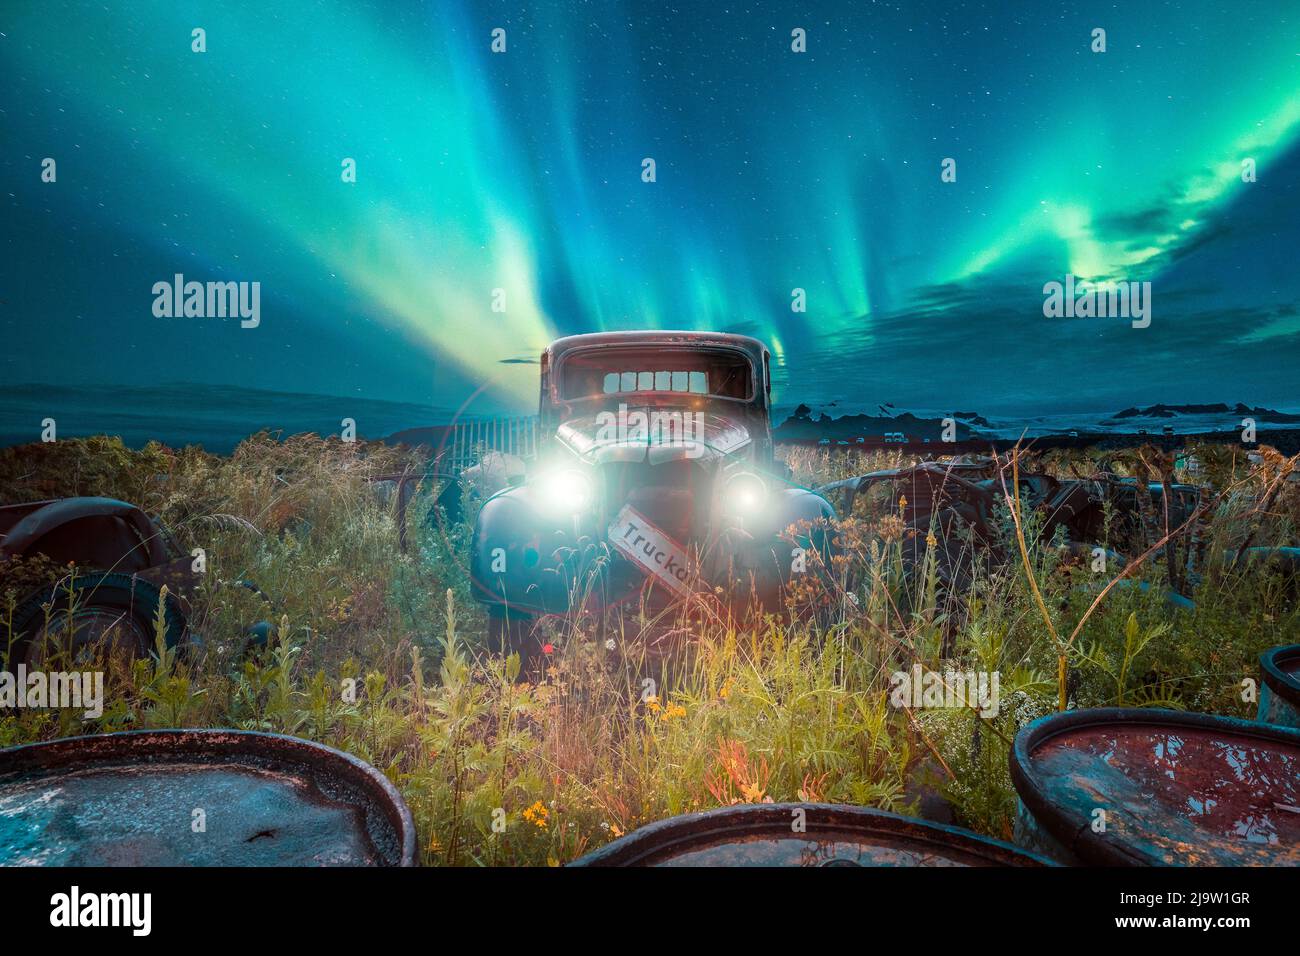 Composing of a car in Sweden and an aurora in Iceland Stock Photo